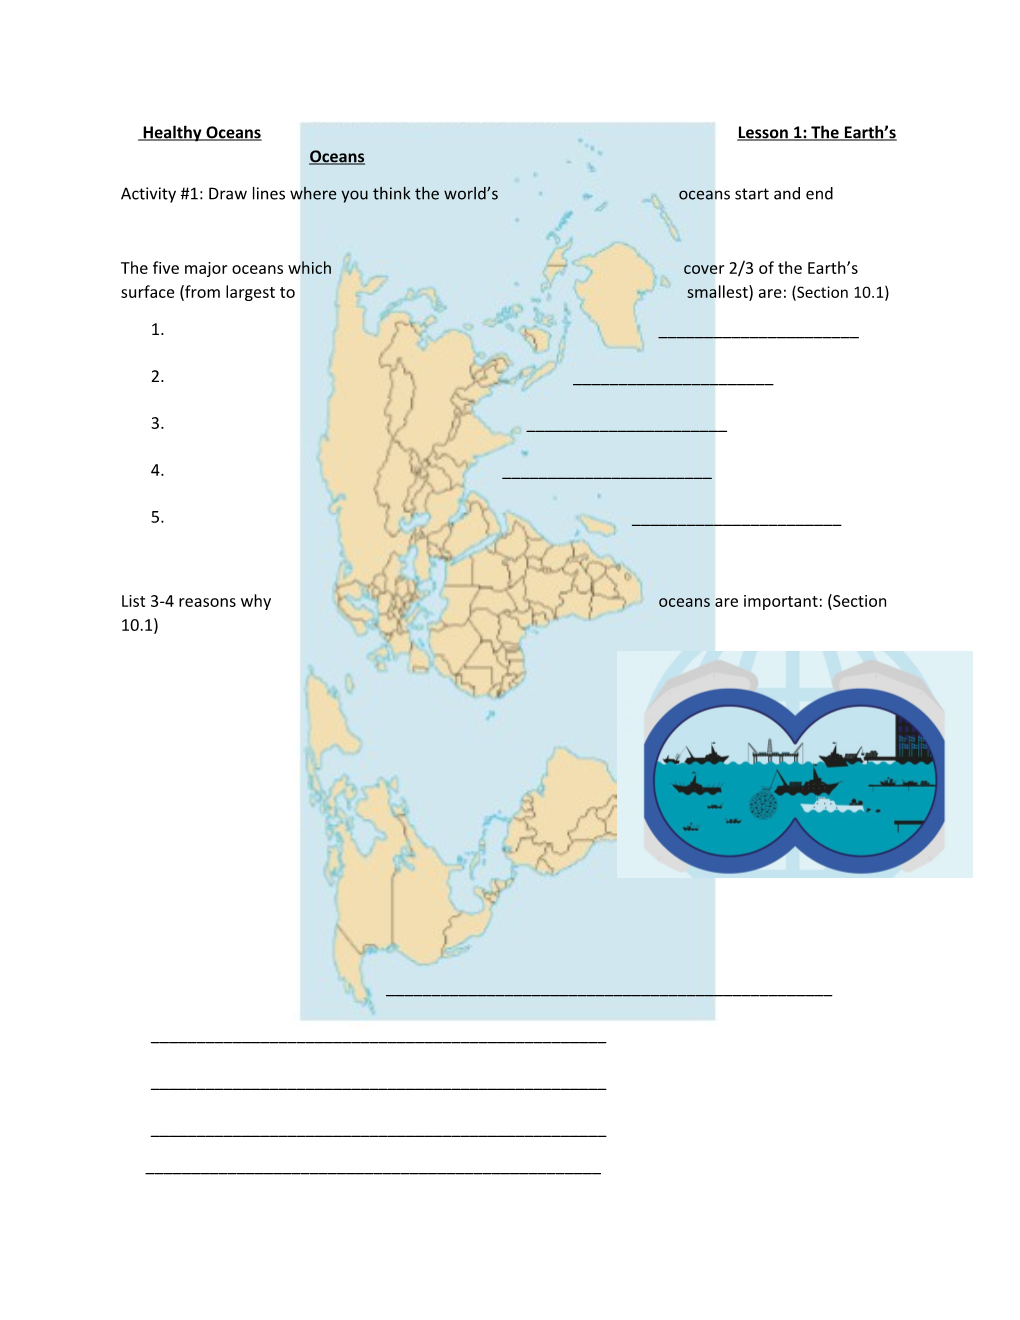 Activity #1: Draw Lines Where You Think the World S Oceans Start and End